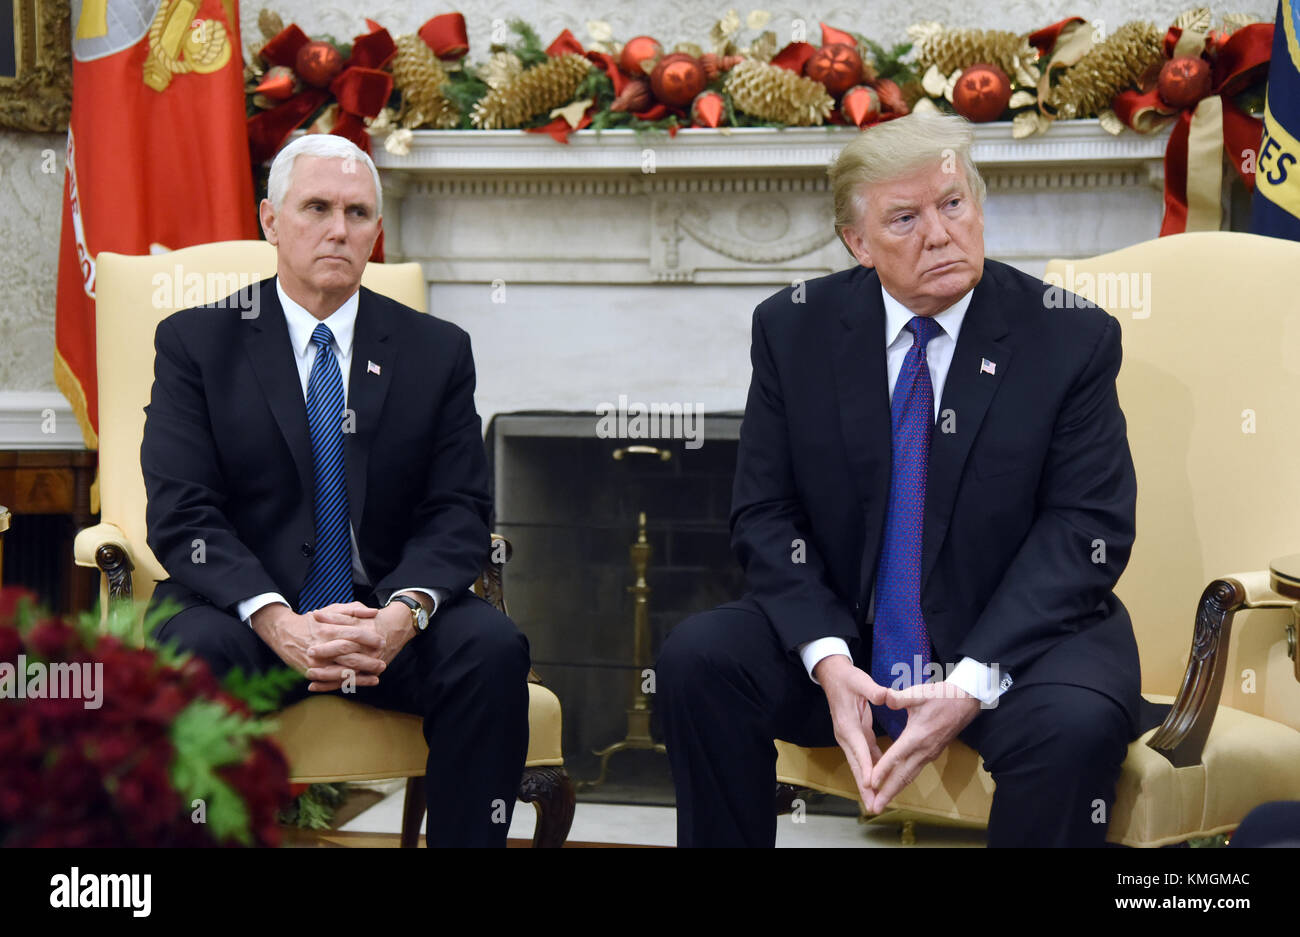 United States President Donald J. Trump and US Vice President Mike Pence meet with bipartisan Congressional leadership in the Oval Office of the White House, December 7, 2017 in Washington, DC. Credit: MediaPunch Inc/Alamy Live News Stock Photo